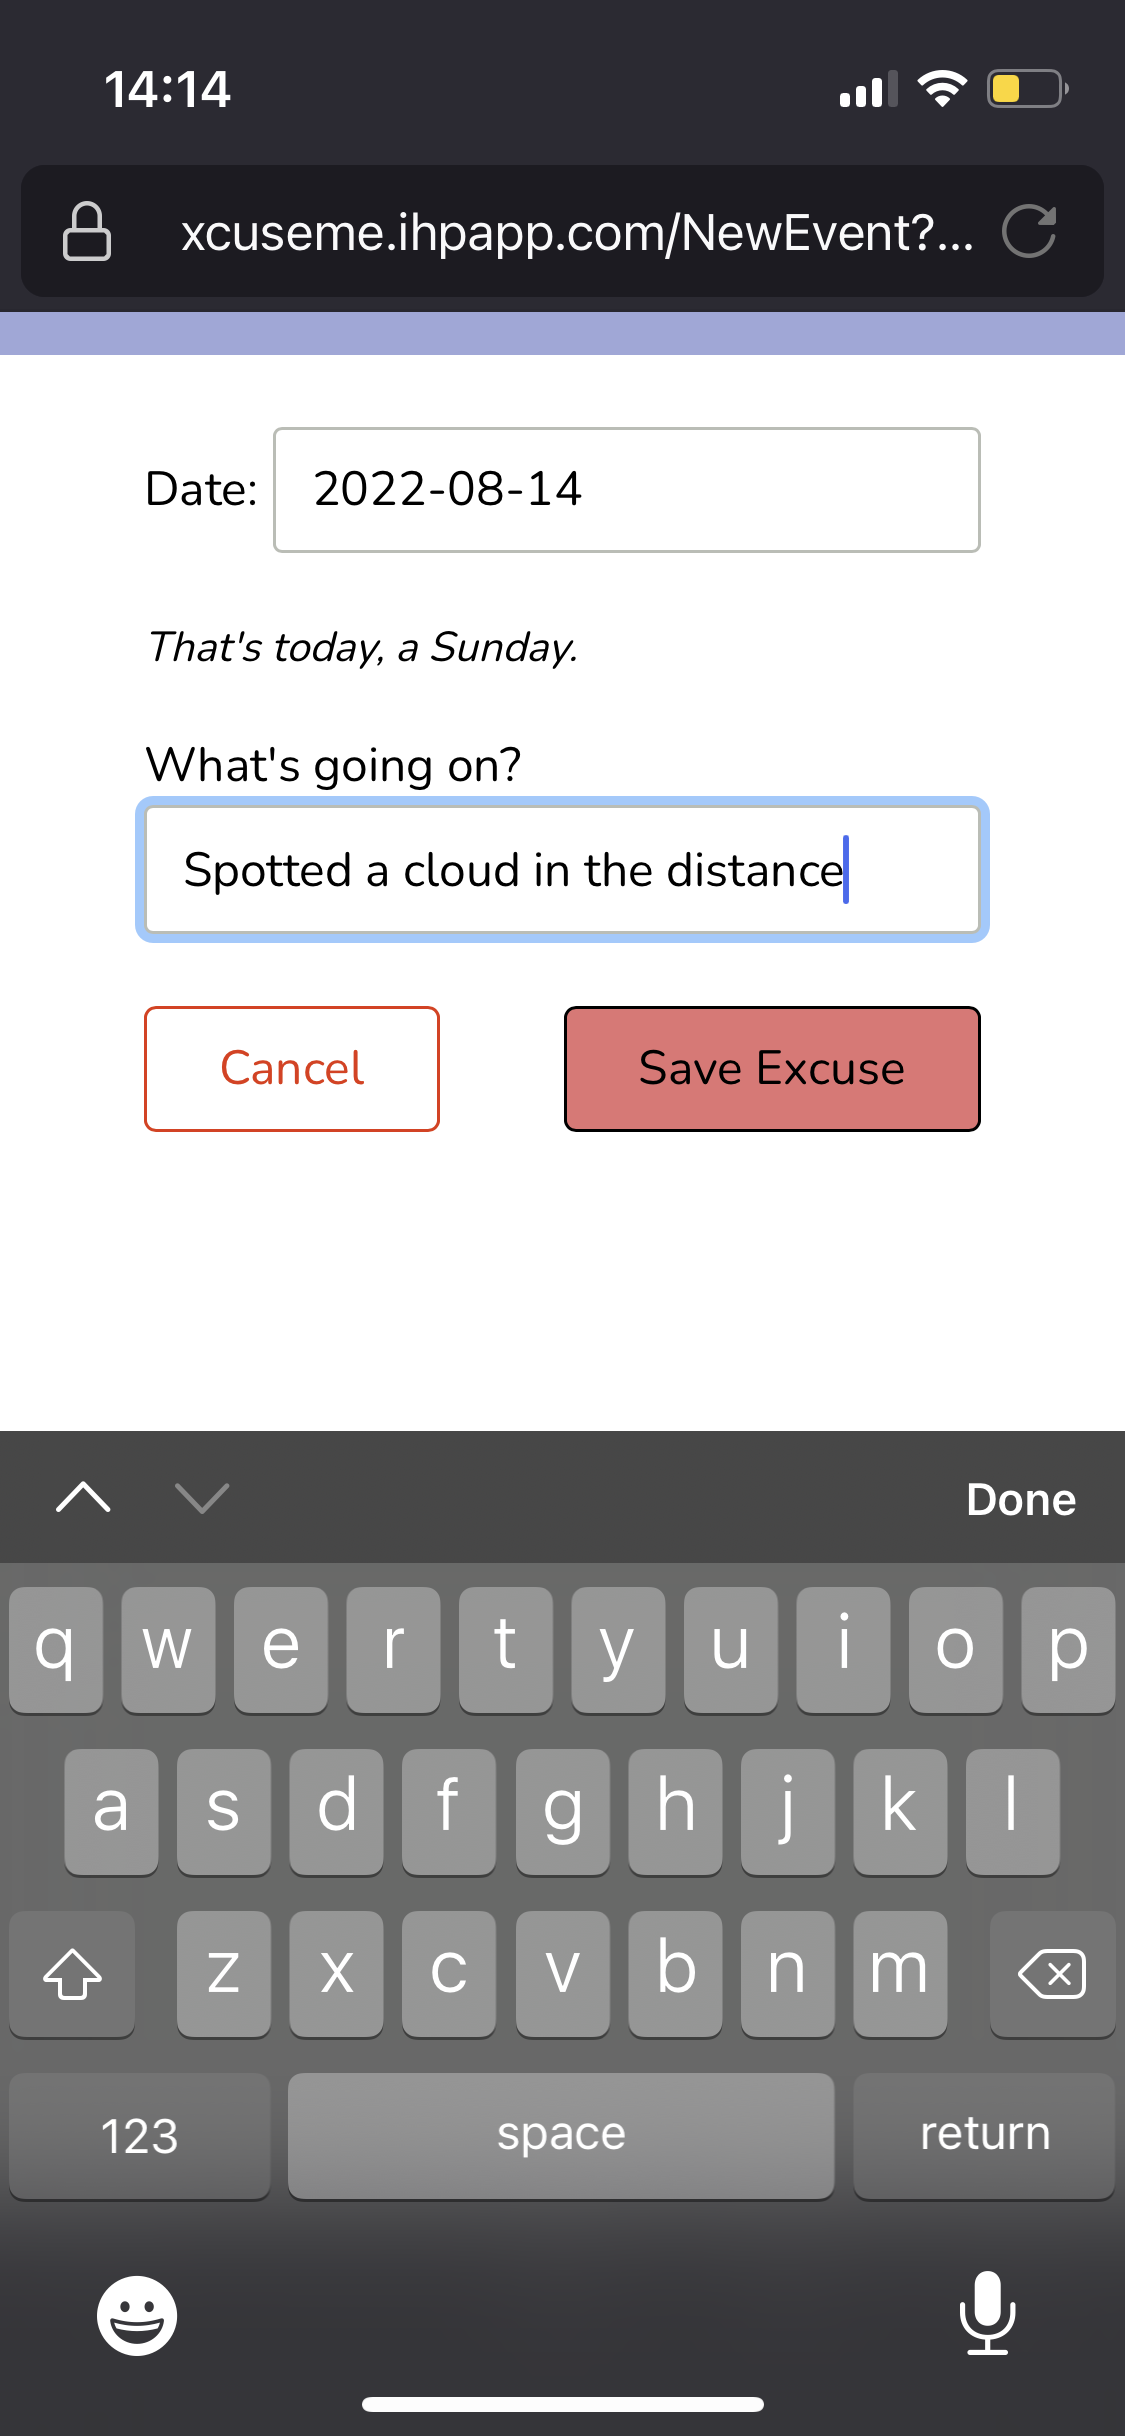 A user interface for adding an excuse with the text of 